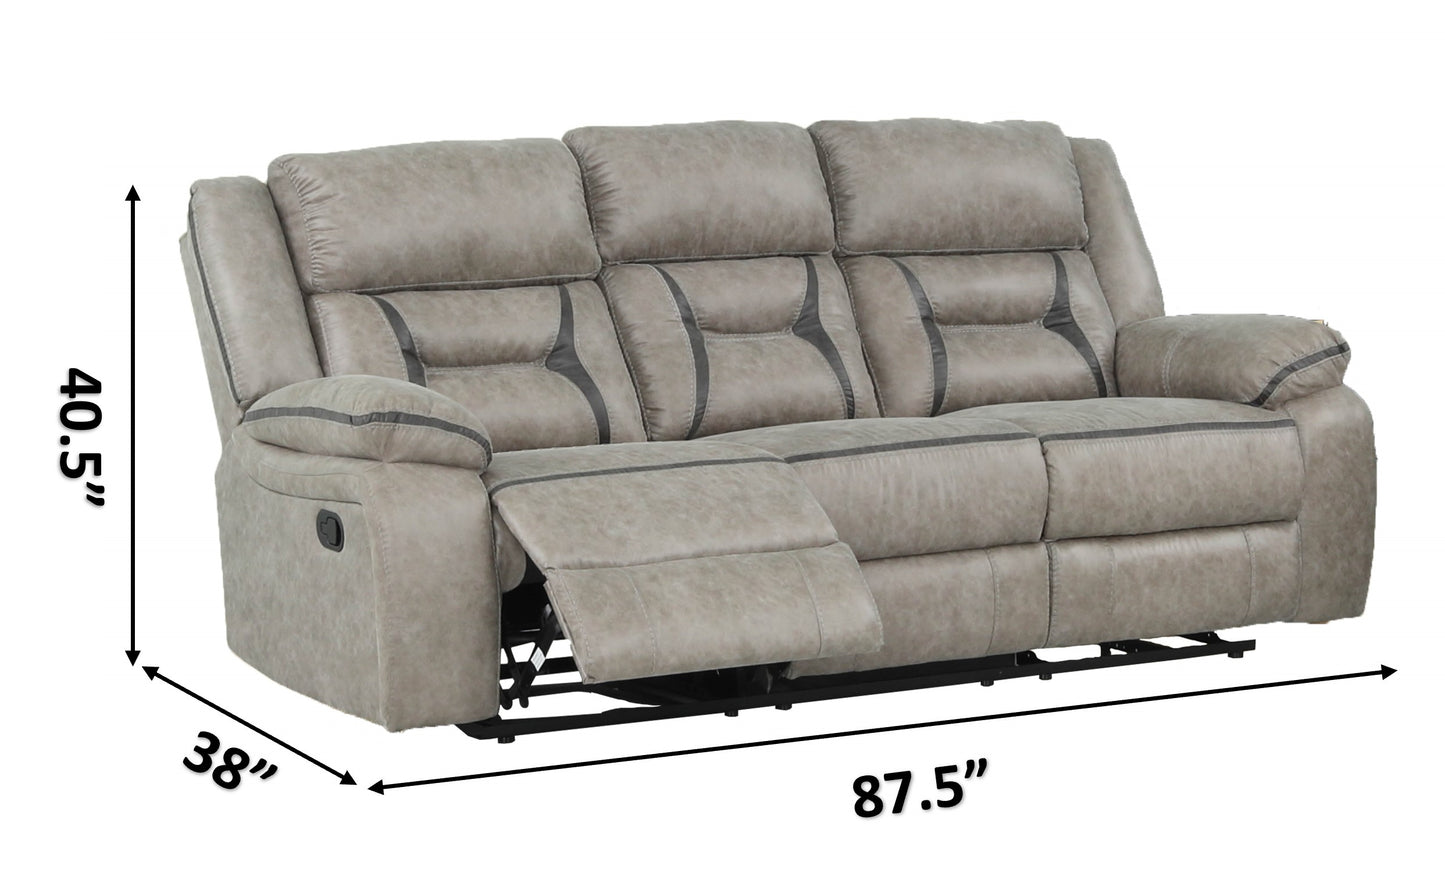 Denali Sofa Made with Faux leather in Grey